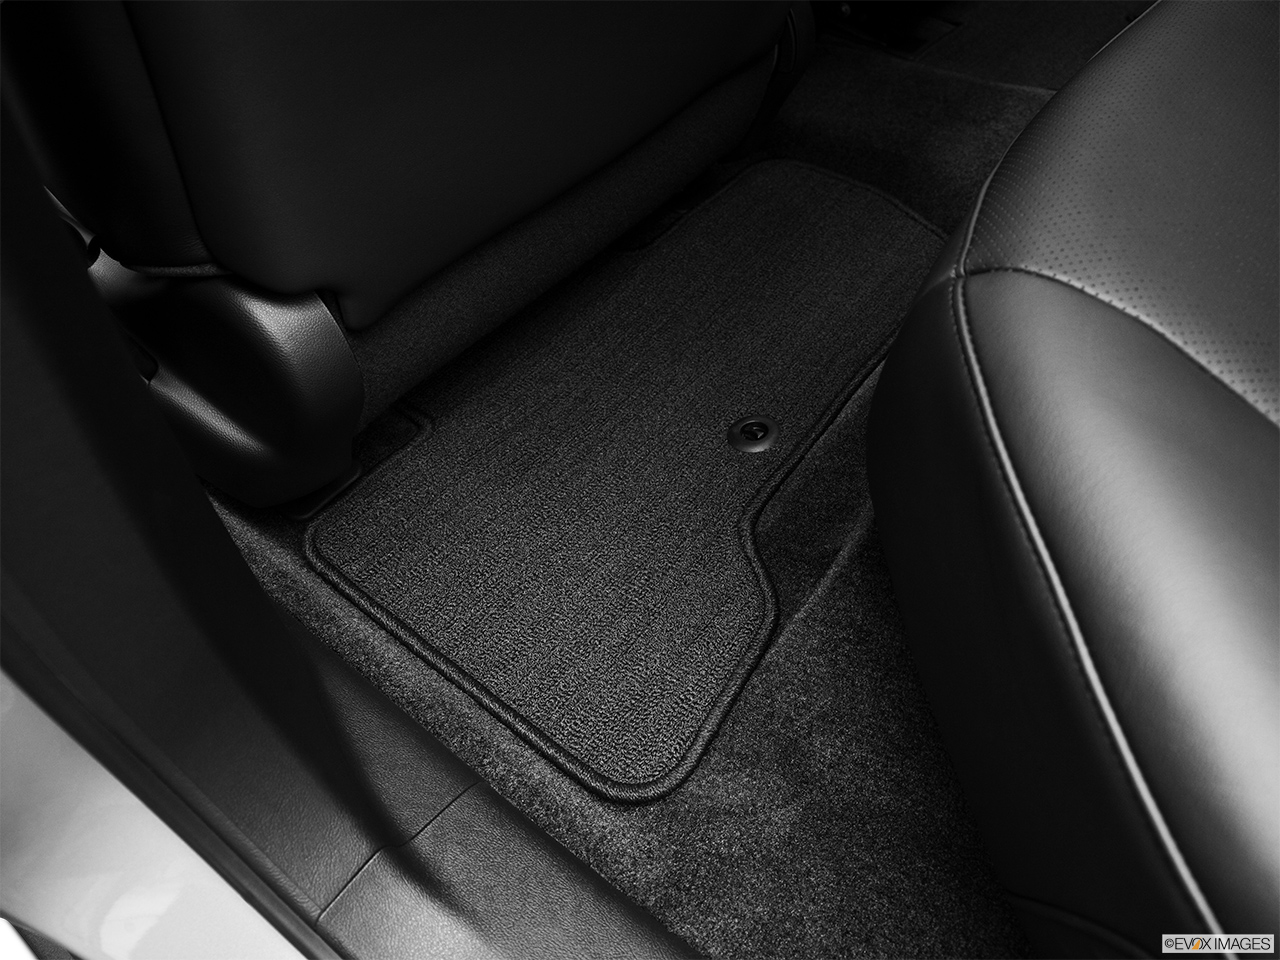 2012 Acura ZDX ZDX Advance Rear driver's side floor mat. Mid-seat level from outside looking in. 